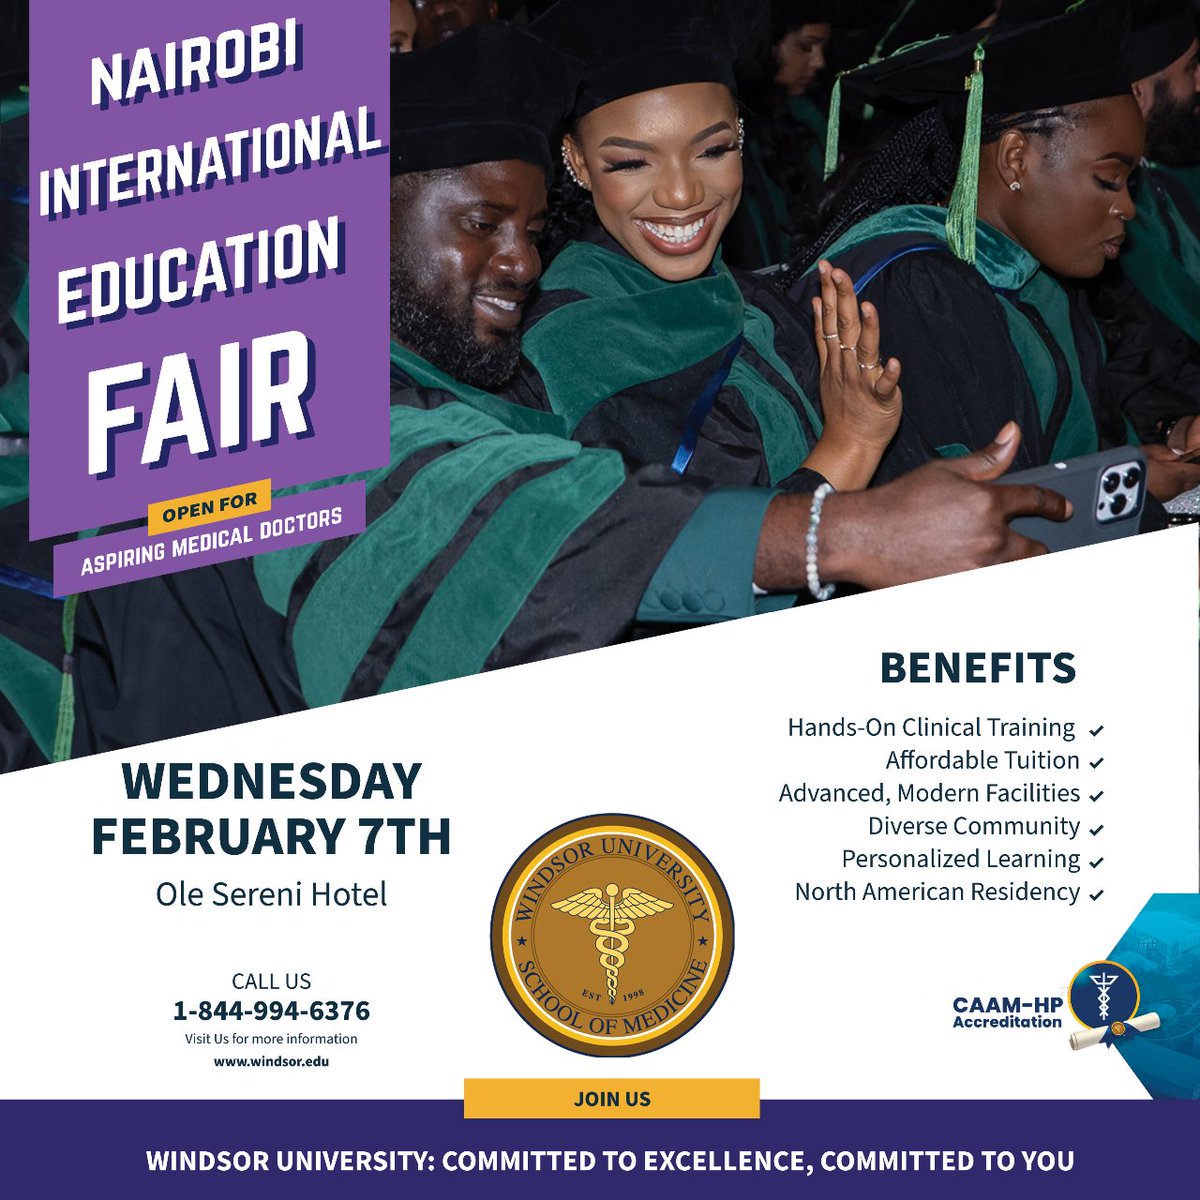 Join Us at the Nairobi International Education Fair on February 7th! 🌍🎓 Don't miss this opportunity to meet our team in person! #educationalfair #nairobieducationfair #nairobi #medicalschool